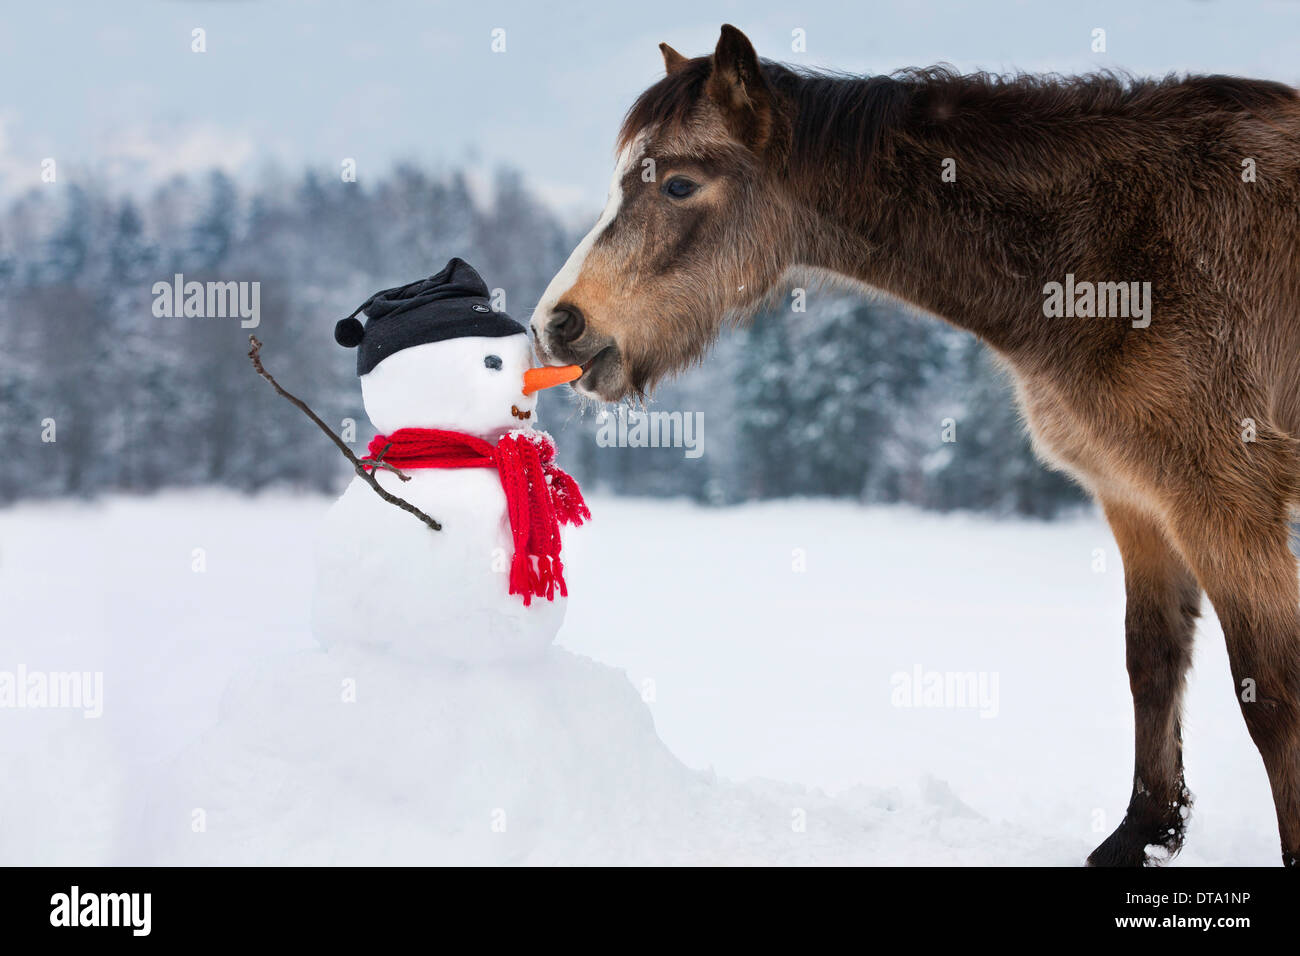 Welsh Mountain Pony eating carrot nose of a snowman, North Tyrol, Austria Stock Photo